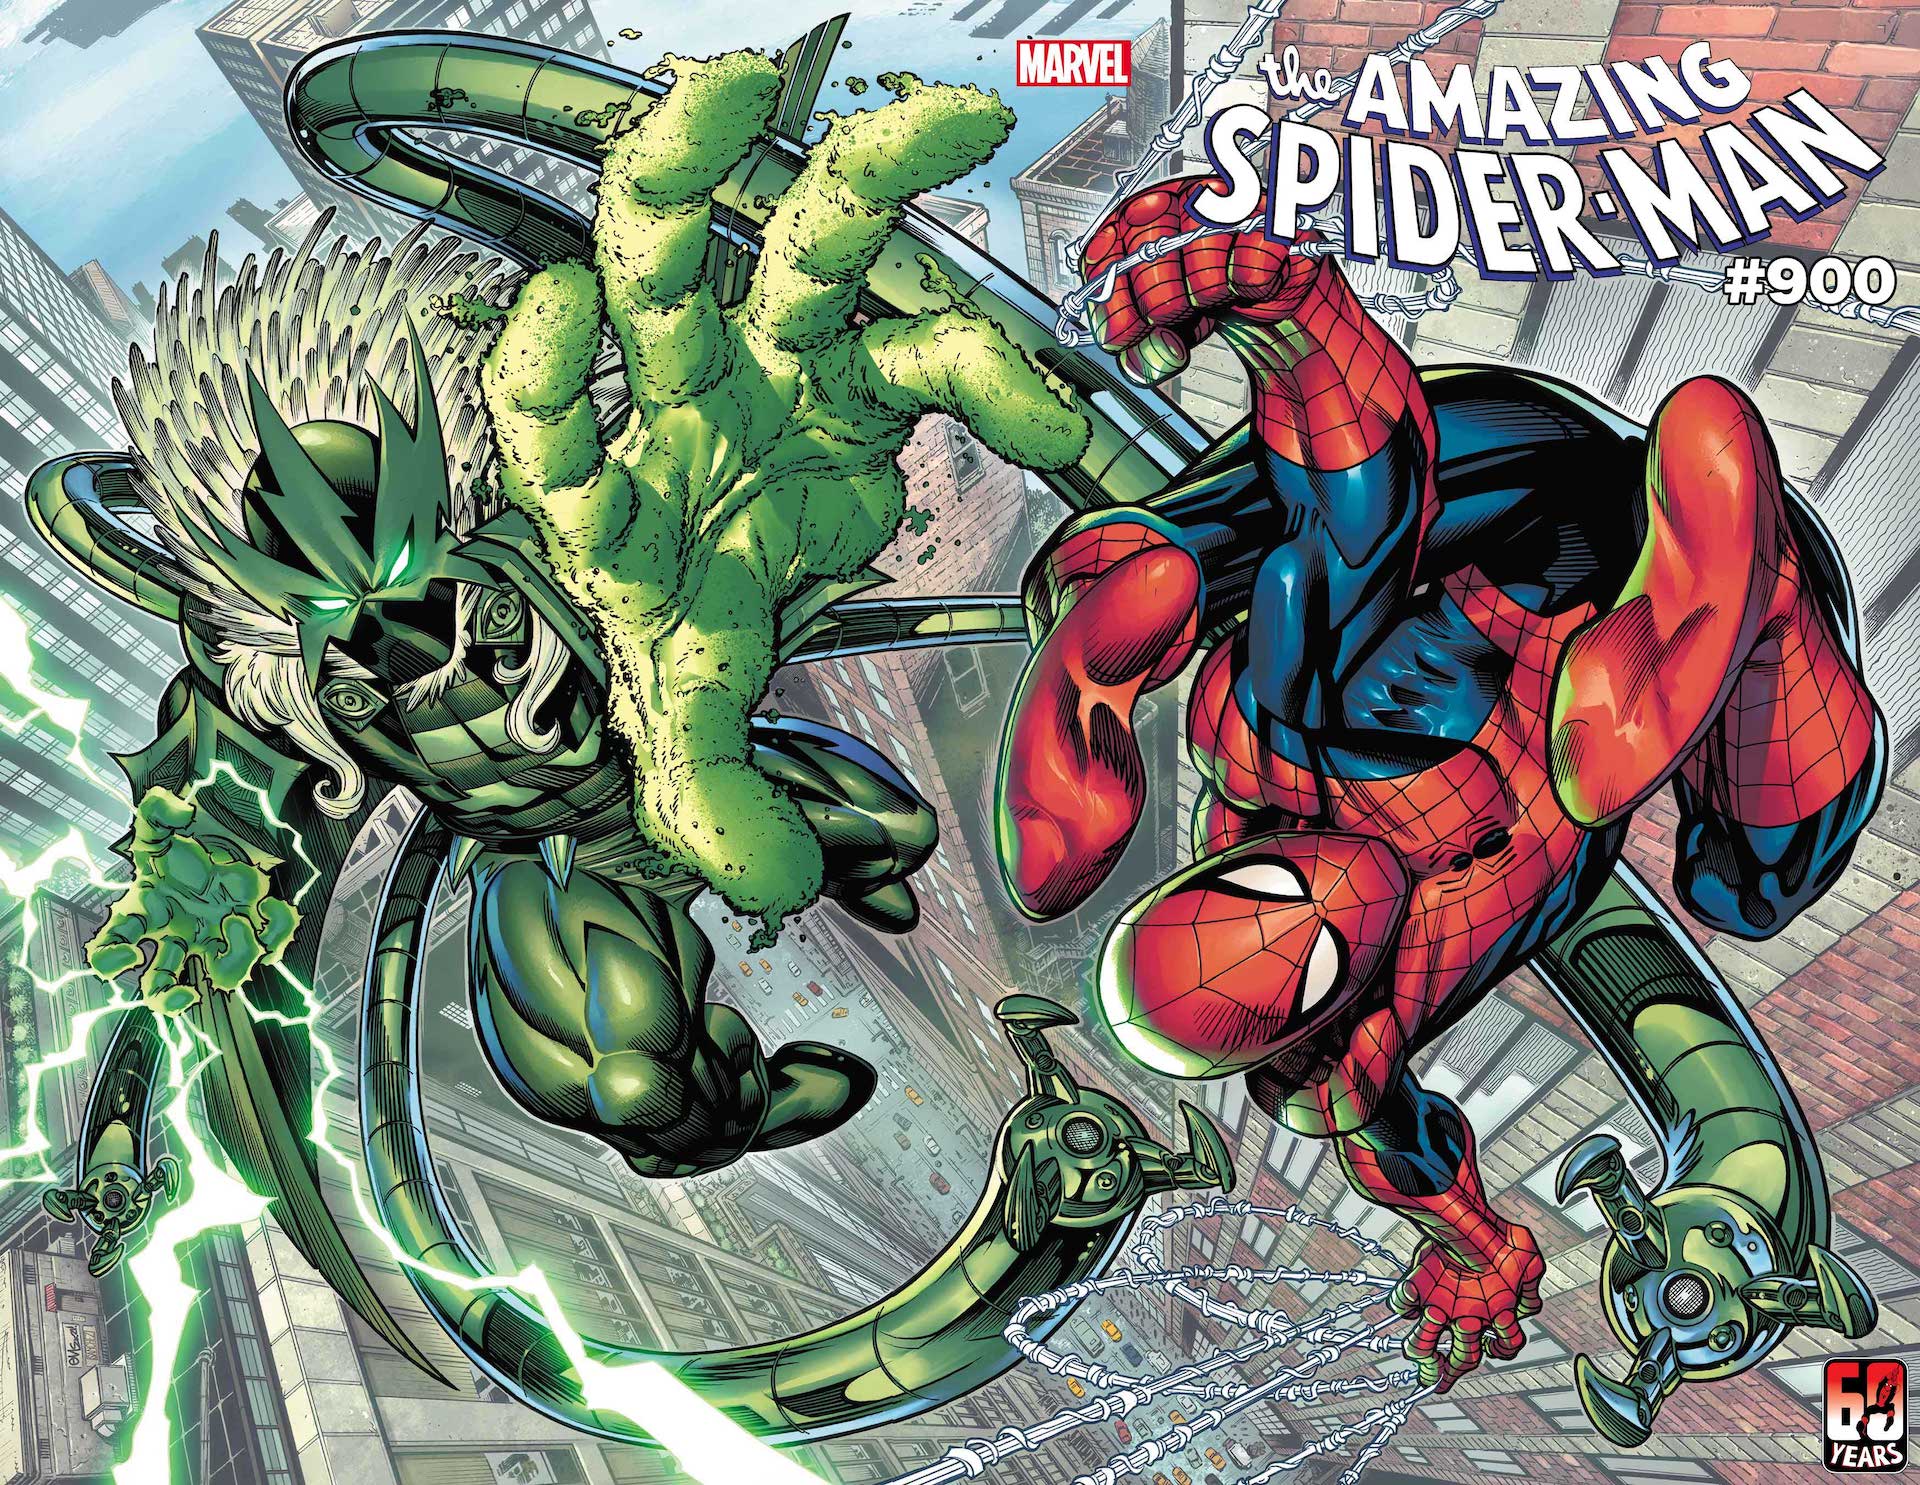 New 'Sinister Six' take Sinister Adaptoid to appear in 'Amazing Spider-Man' #900